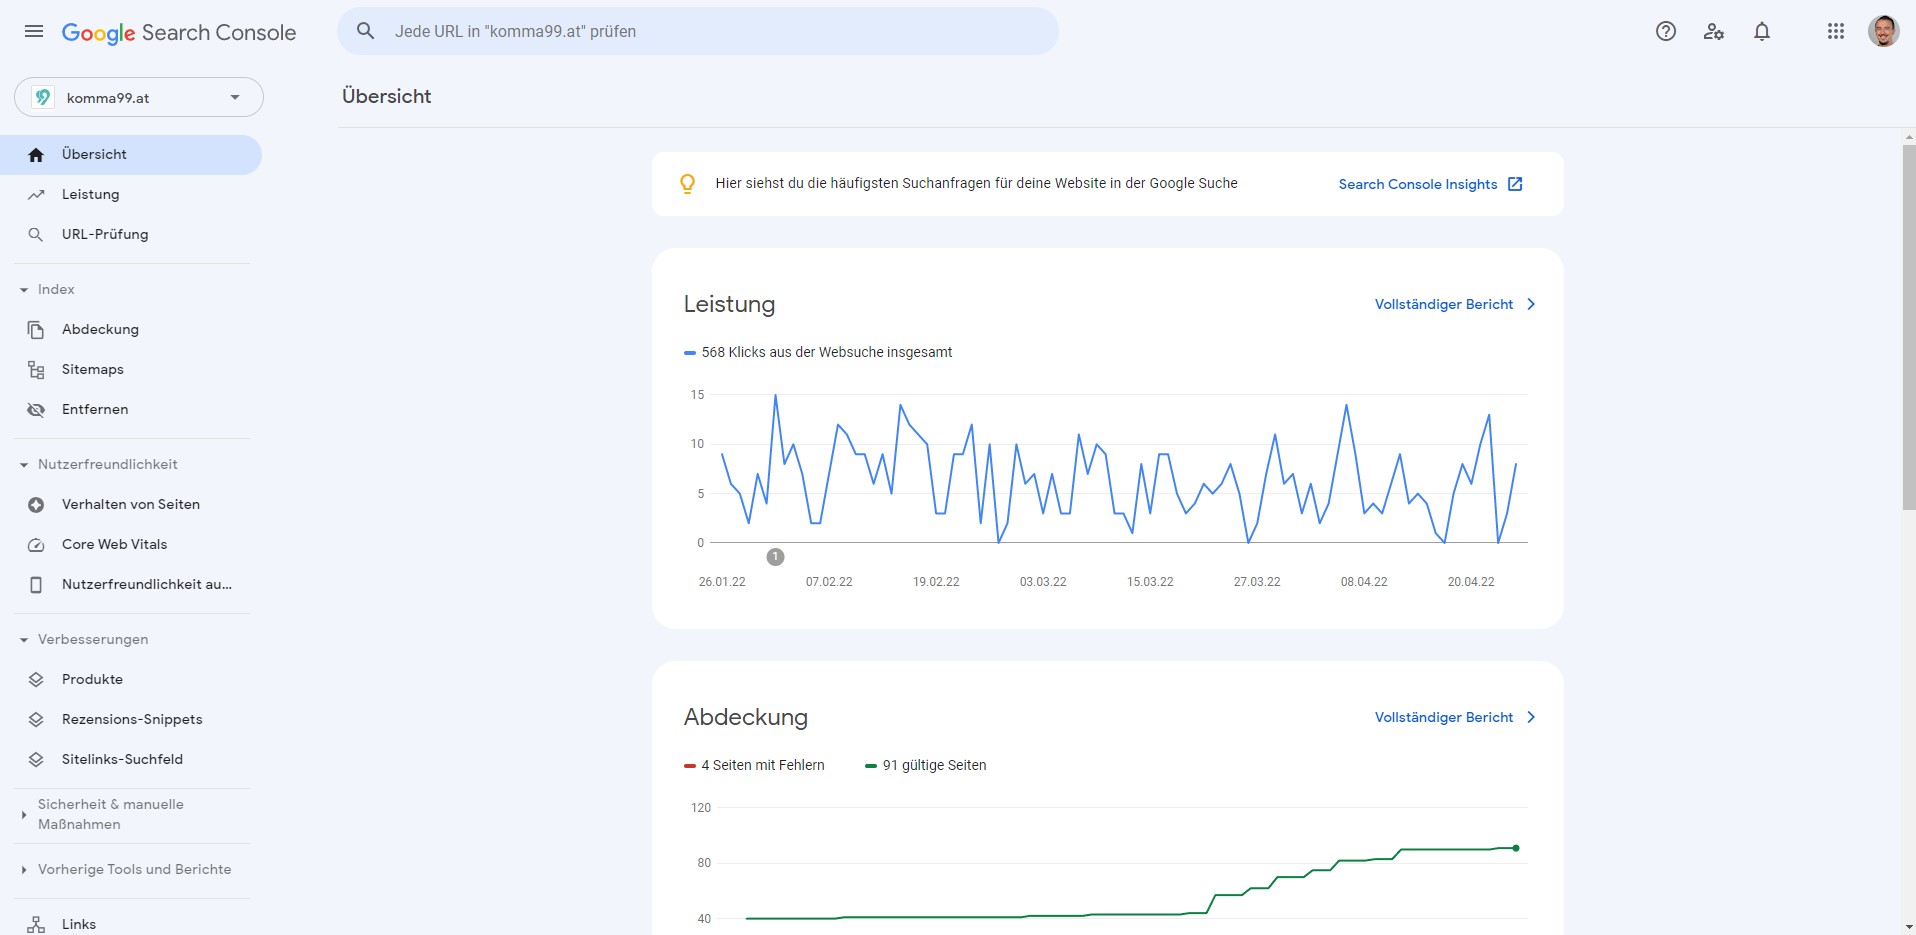 Google Search Console - Overview